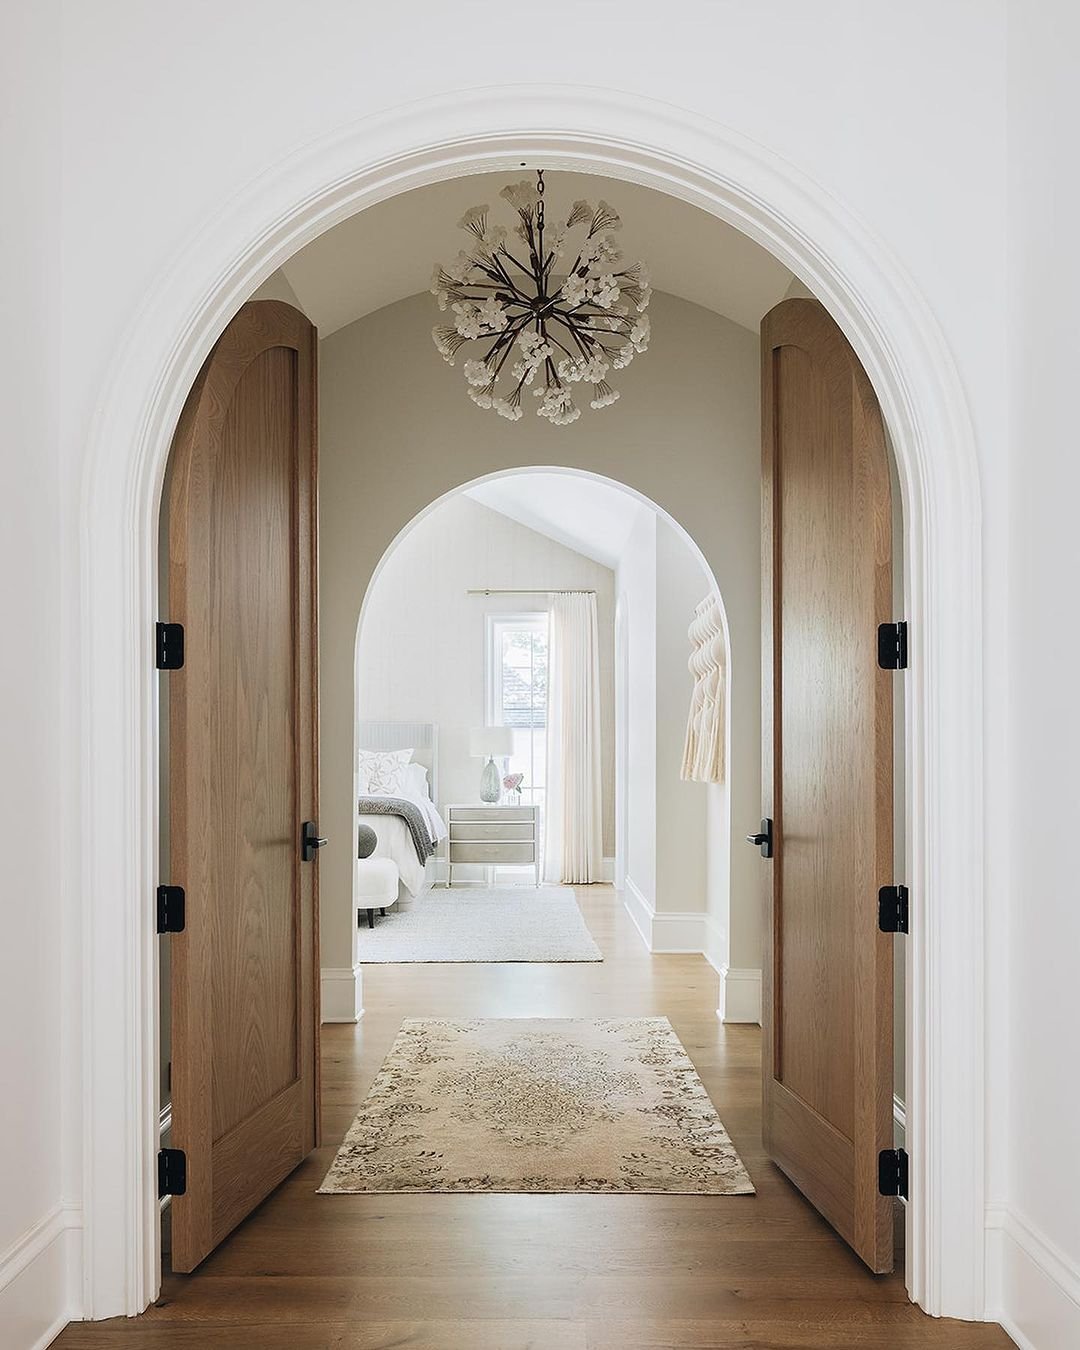 Making an entrance doesn&rsquo;t only happen at your front door. Sometimes it can happen at your primary suite as well. ⁣
⁣
Designer Permission/Credit: @amystormandco⁣
Photographer: @stofferphotographyinteriors ⁣
⁣
⁣
⁣
⁣
⁣
⁣
⁣
⁣
⁣
#CompassRealEstate 